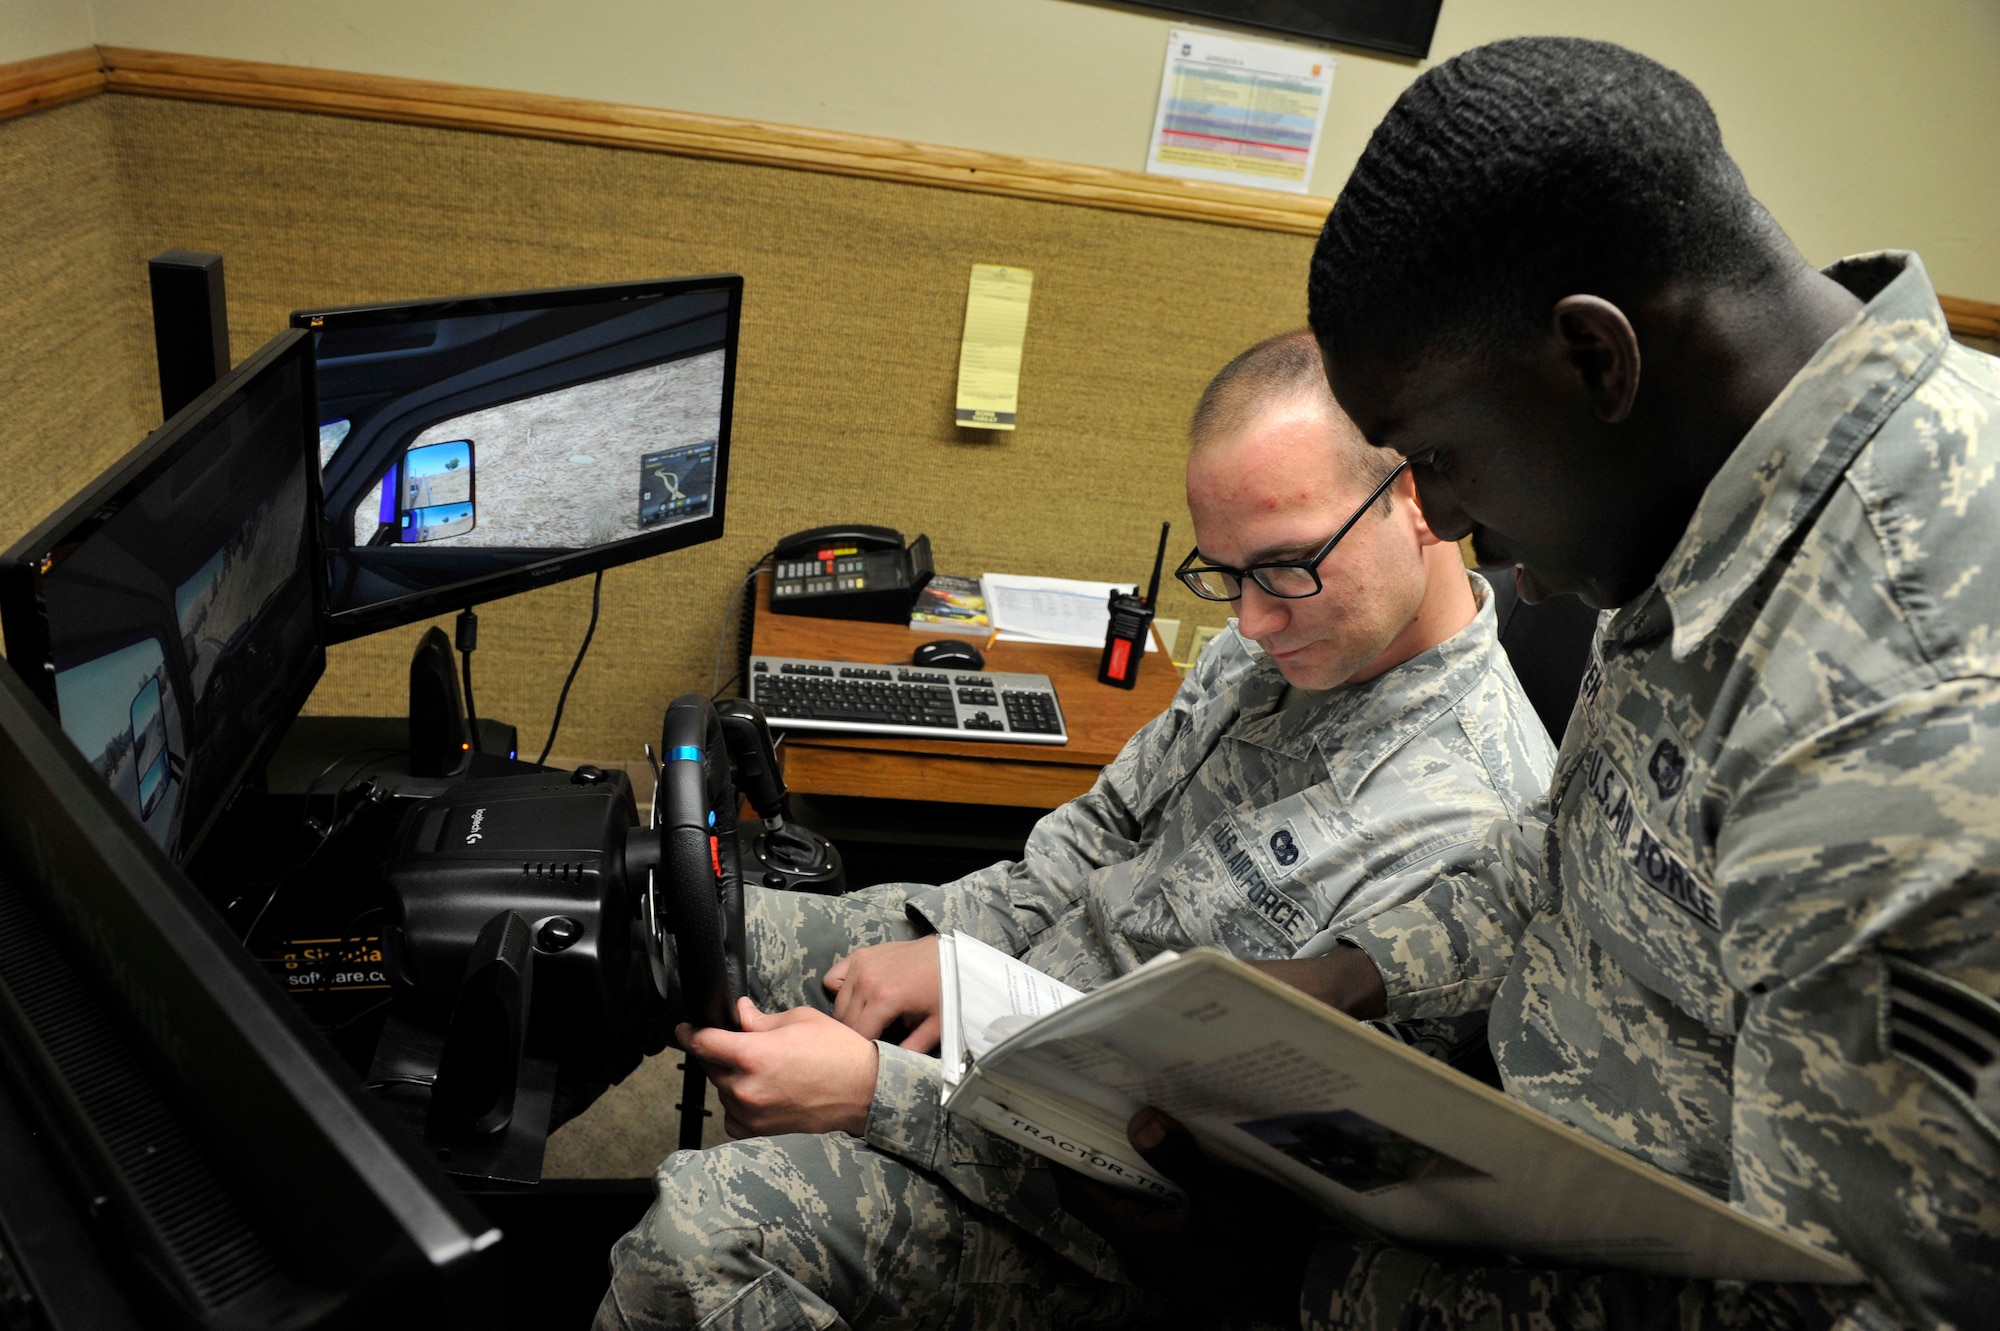 Airman 1st Class Larry Key, 56th Logistics Readiness Squadron vehicle operator dispatcher, and Senior Airman D’Andre Prempeh, 56th LRS vehicle operator trainer, review a lesson plan at Luke Air Force Base, Ariz., March 6, 2018.  The lesson plan supplements training on vehicle maneuvers practiced in the driving simulator.  
(U.S. Air Force Photo by Senior Airman Pedro Mota)